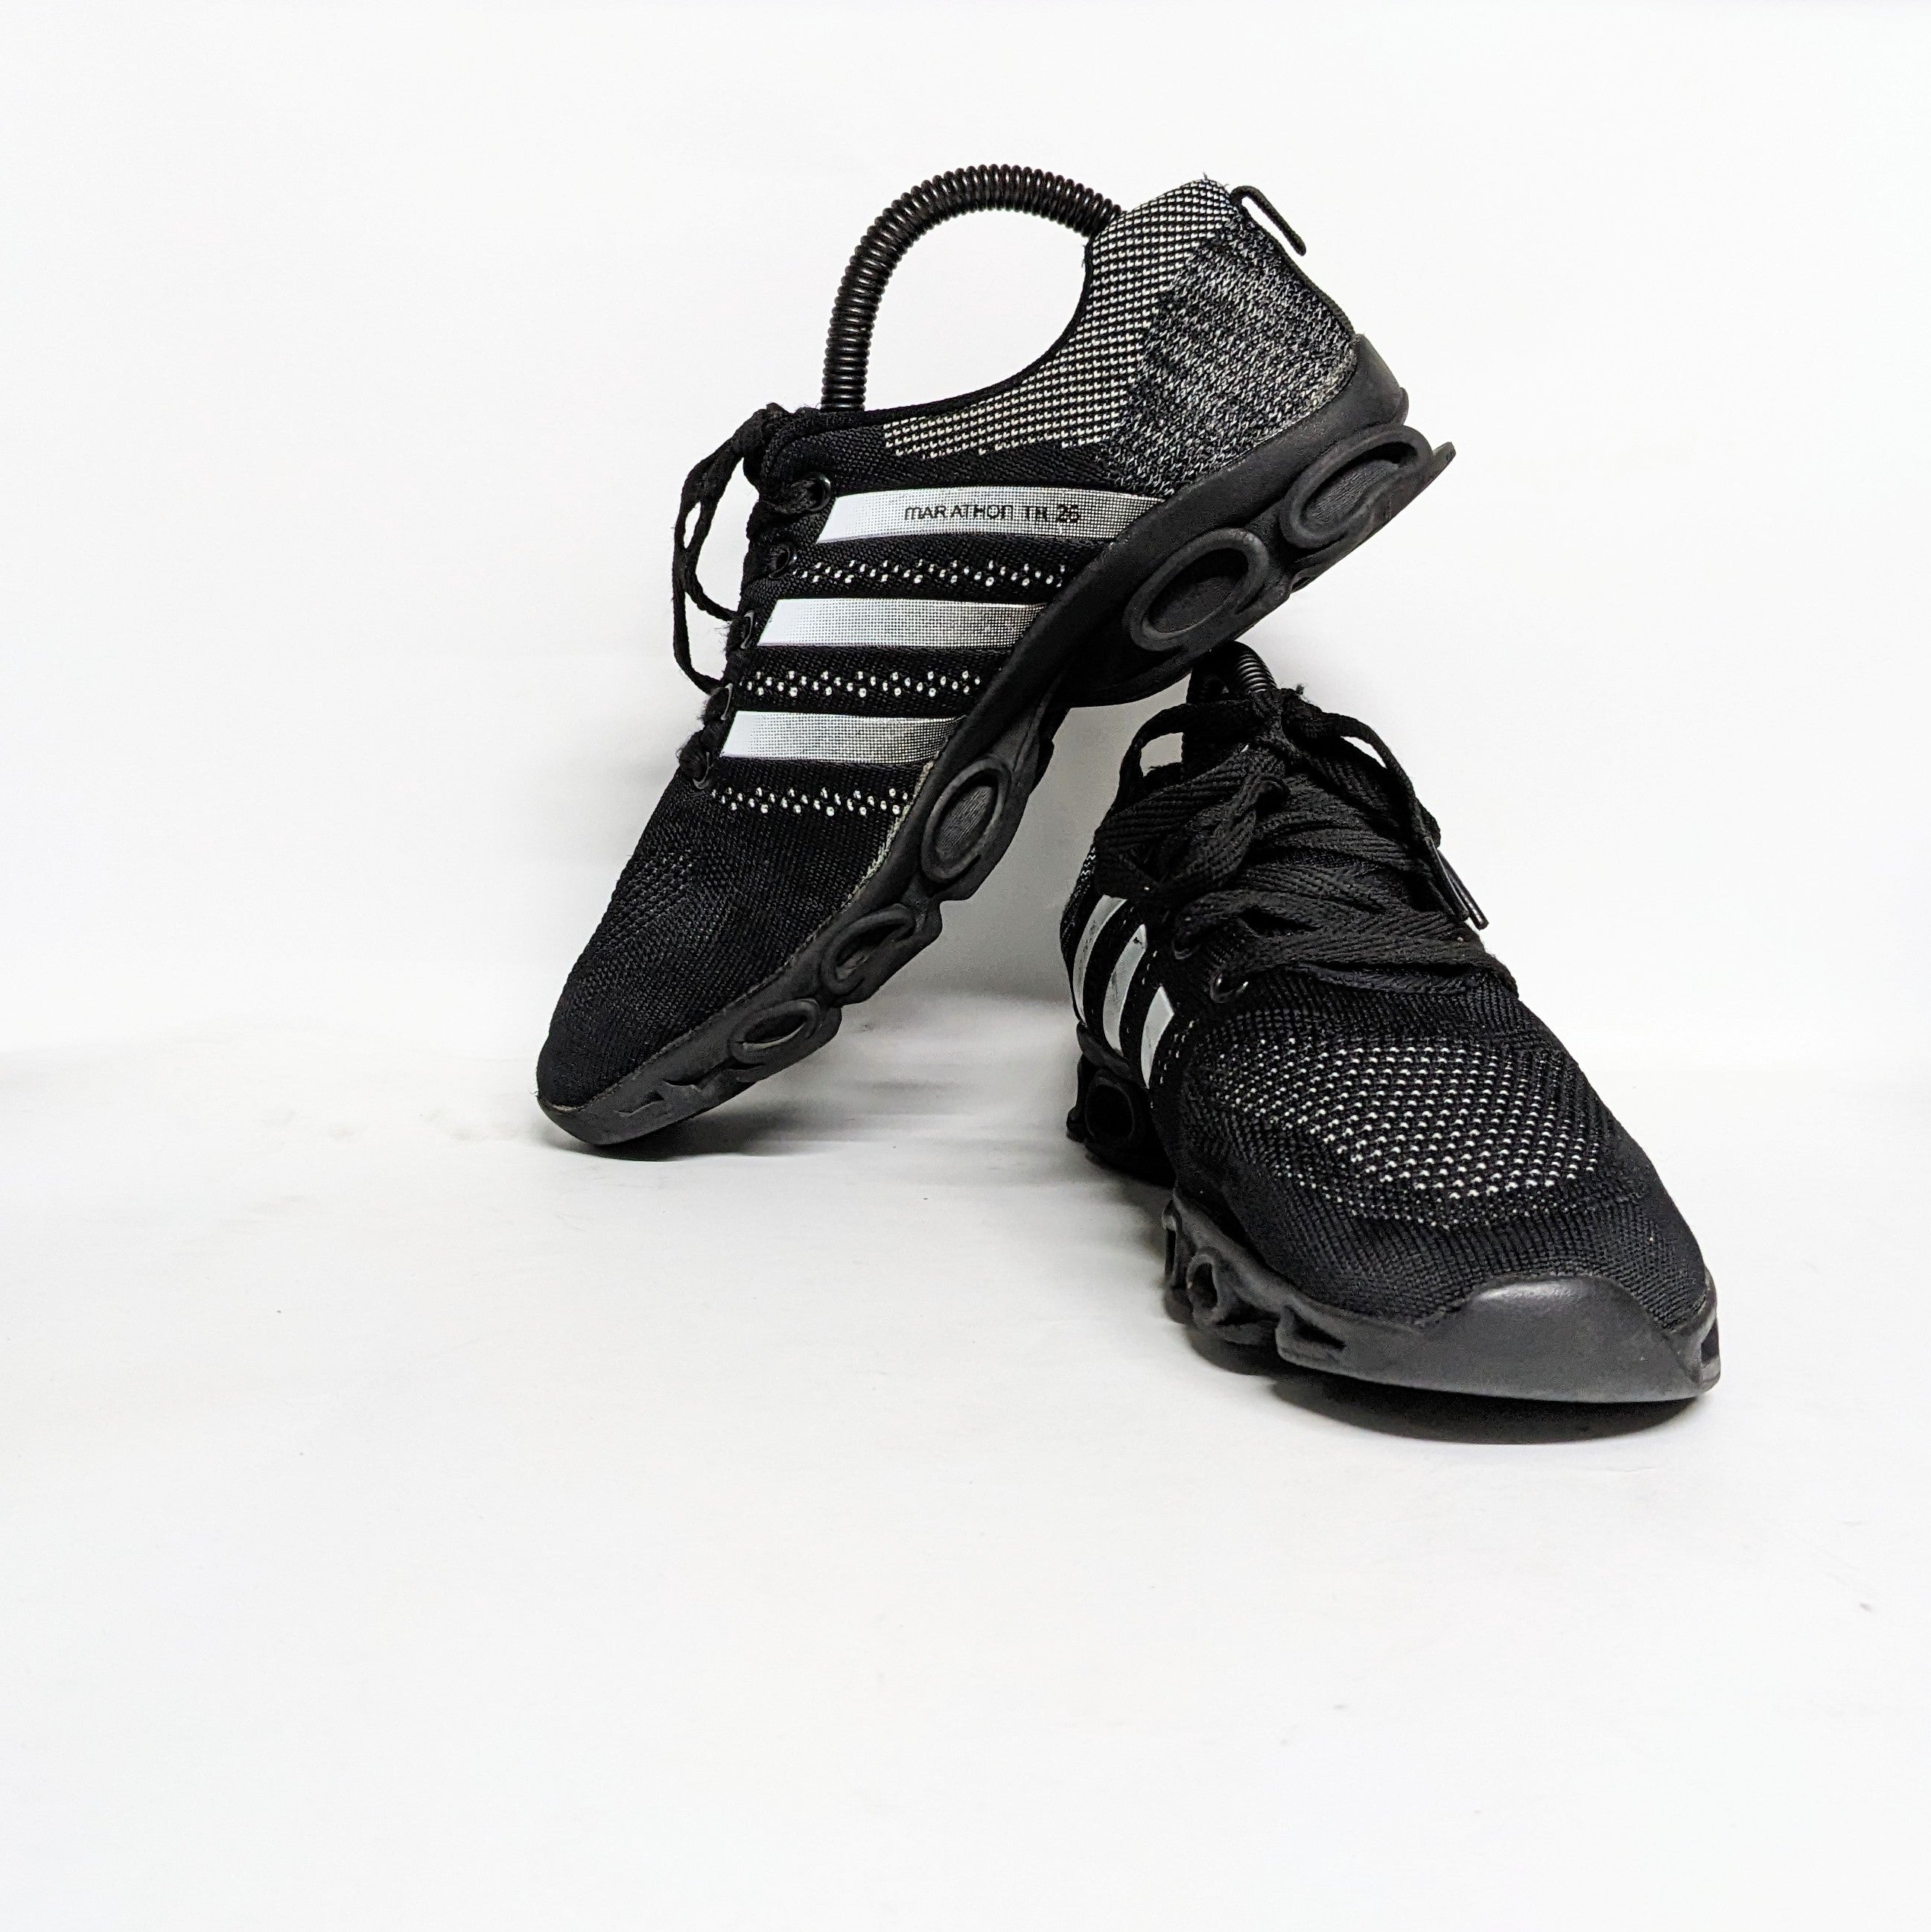 Adidas Black Hiking Lightweight Imported Shoes